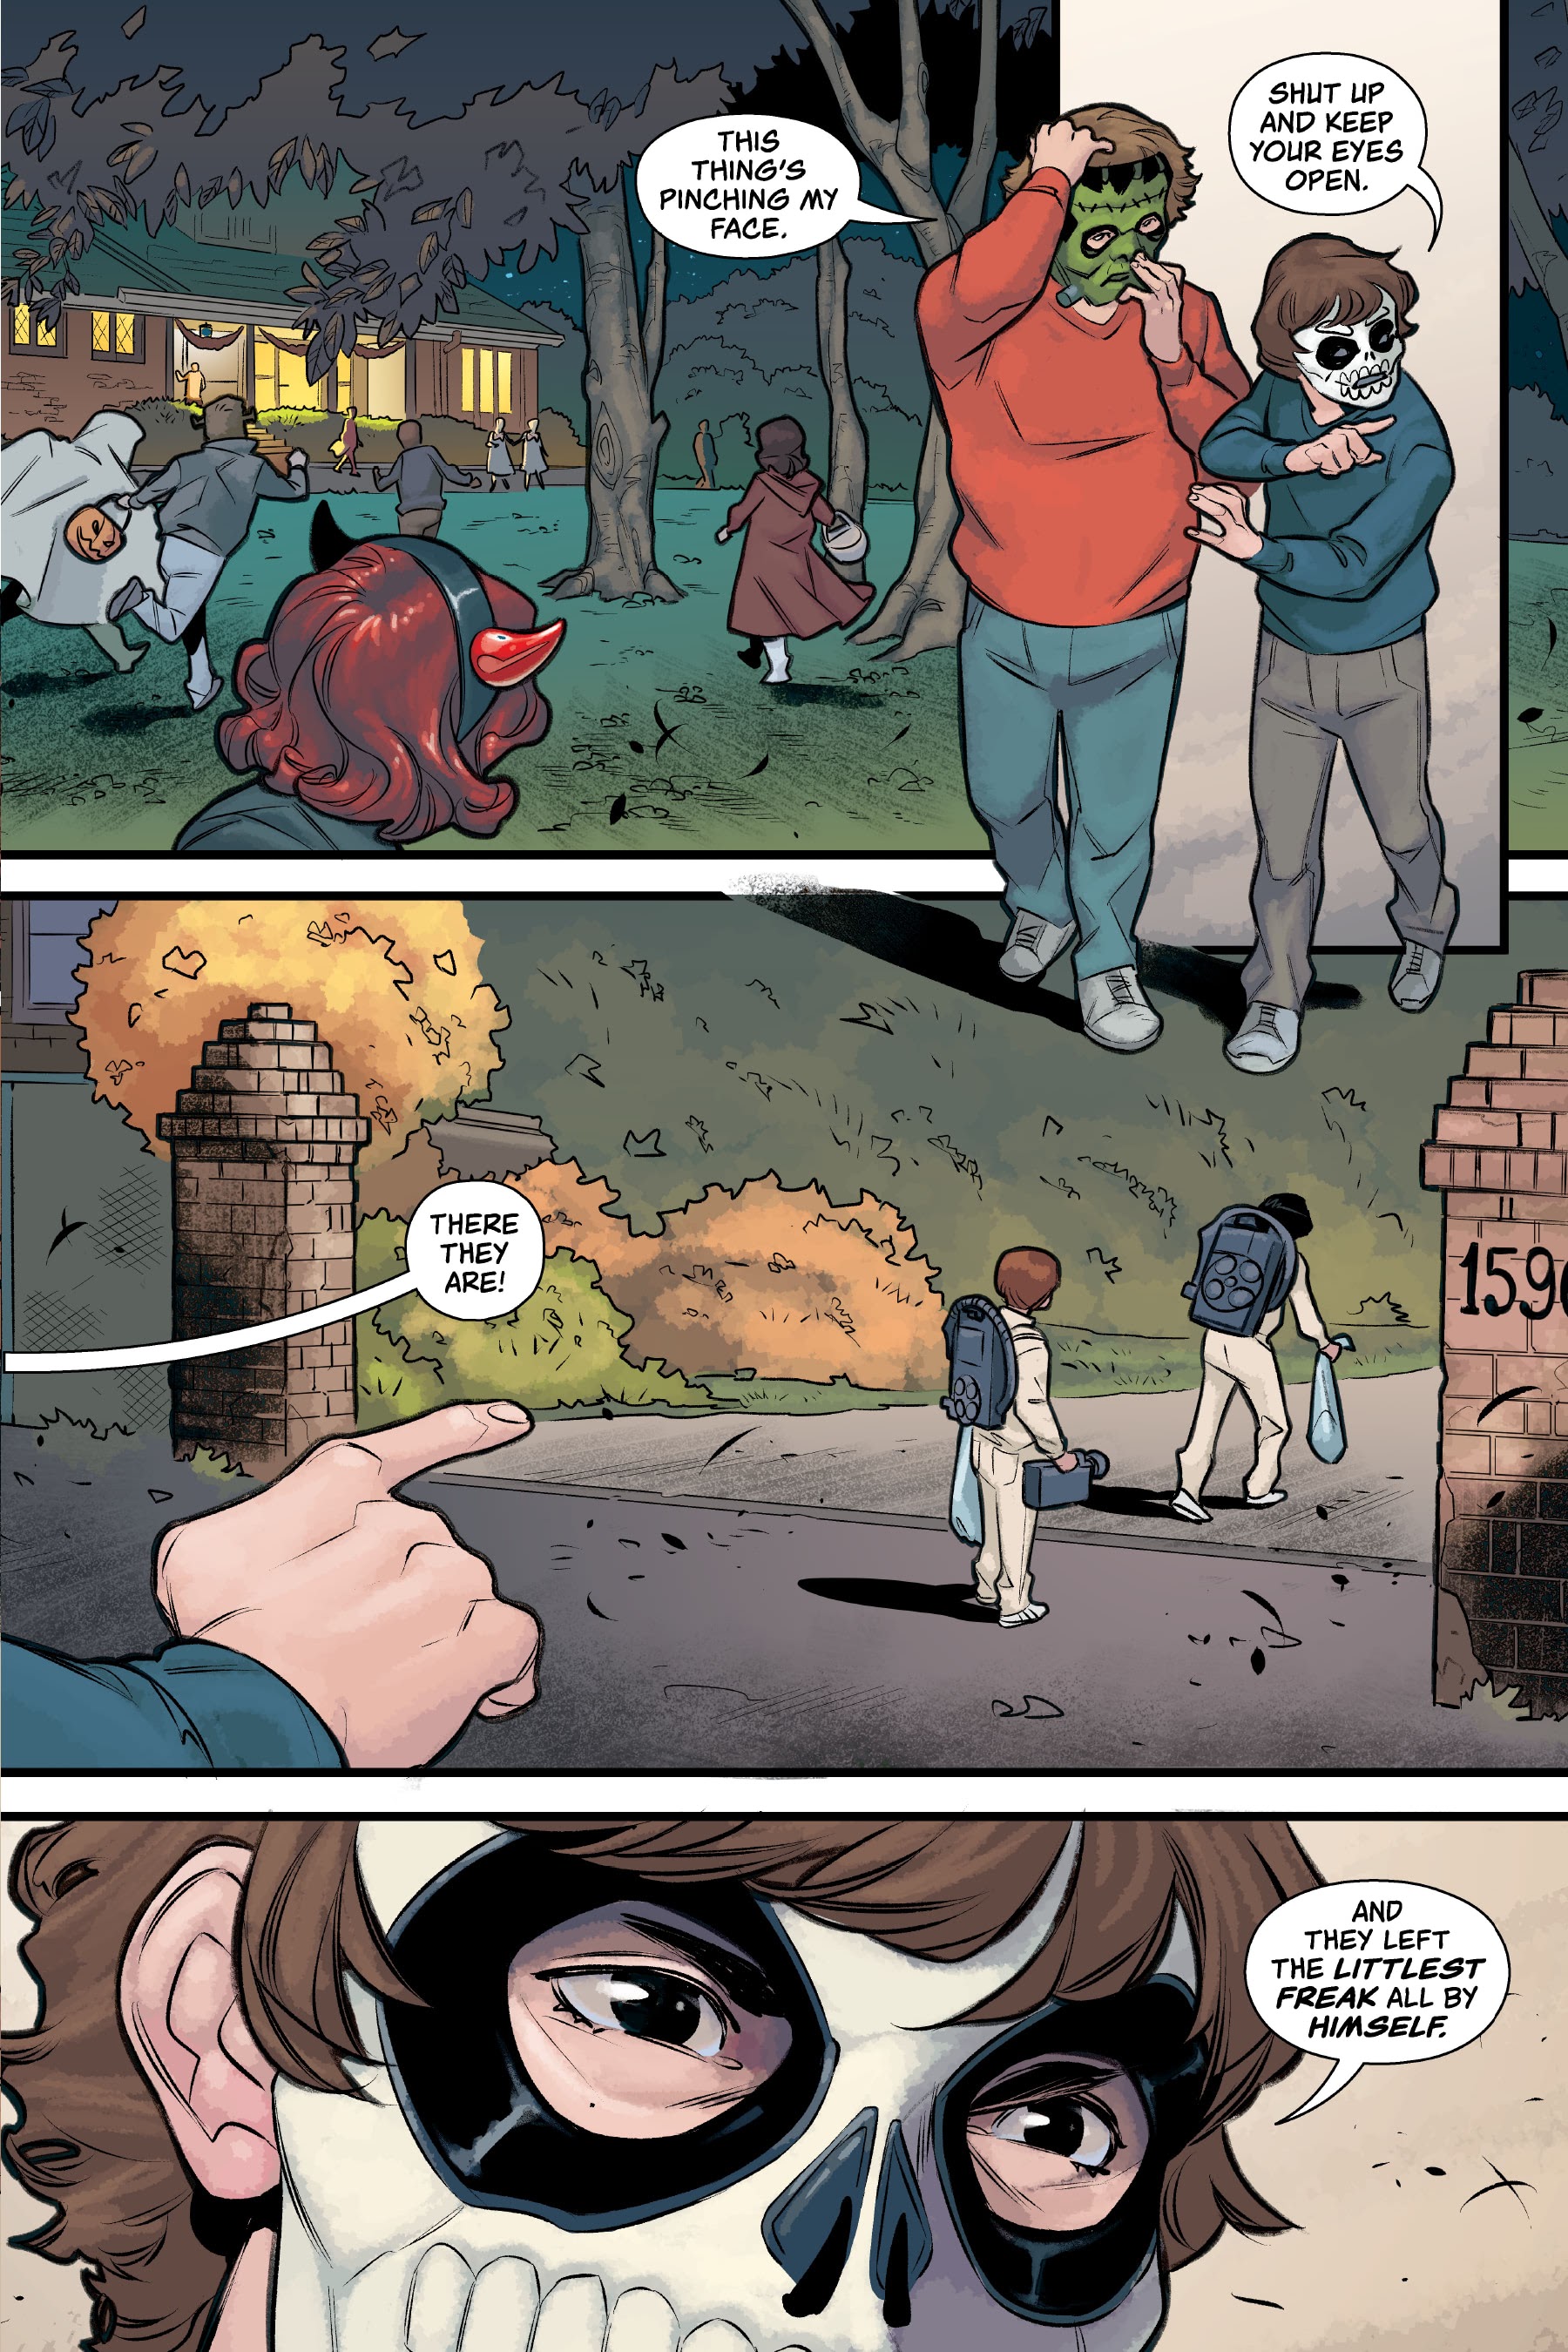 Read online Stranger Things: The Bully comic -  Issue # TPB - 29